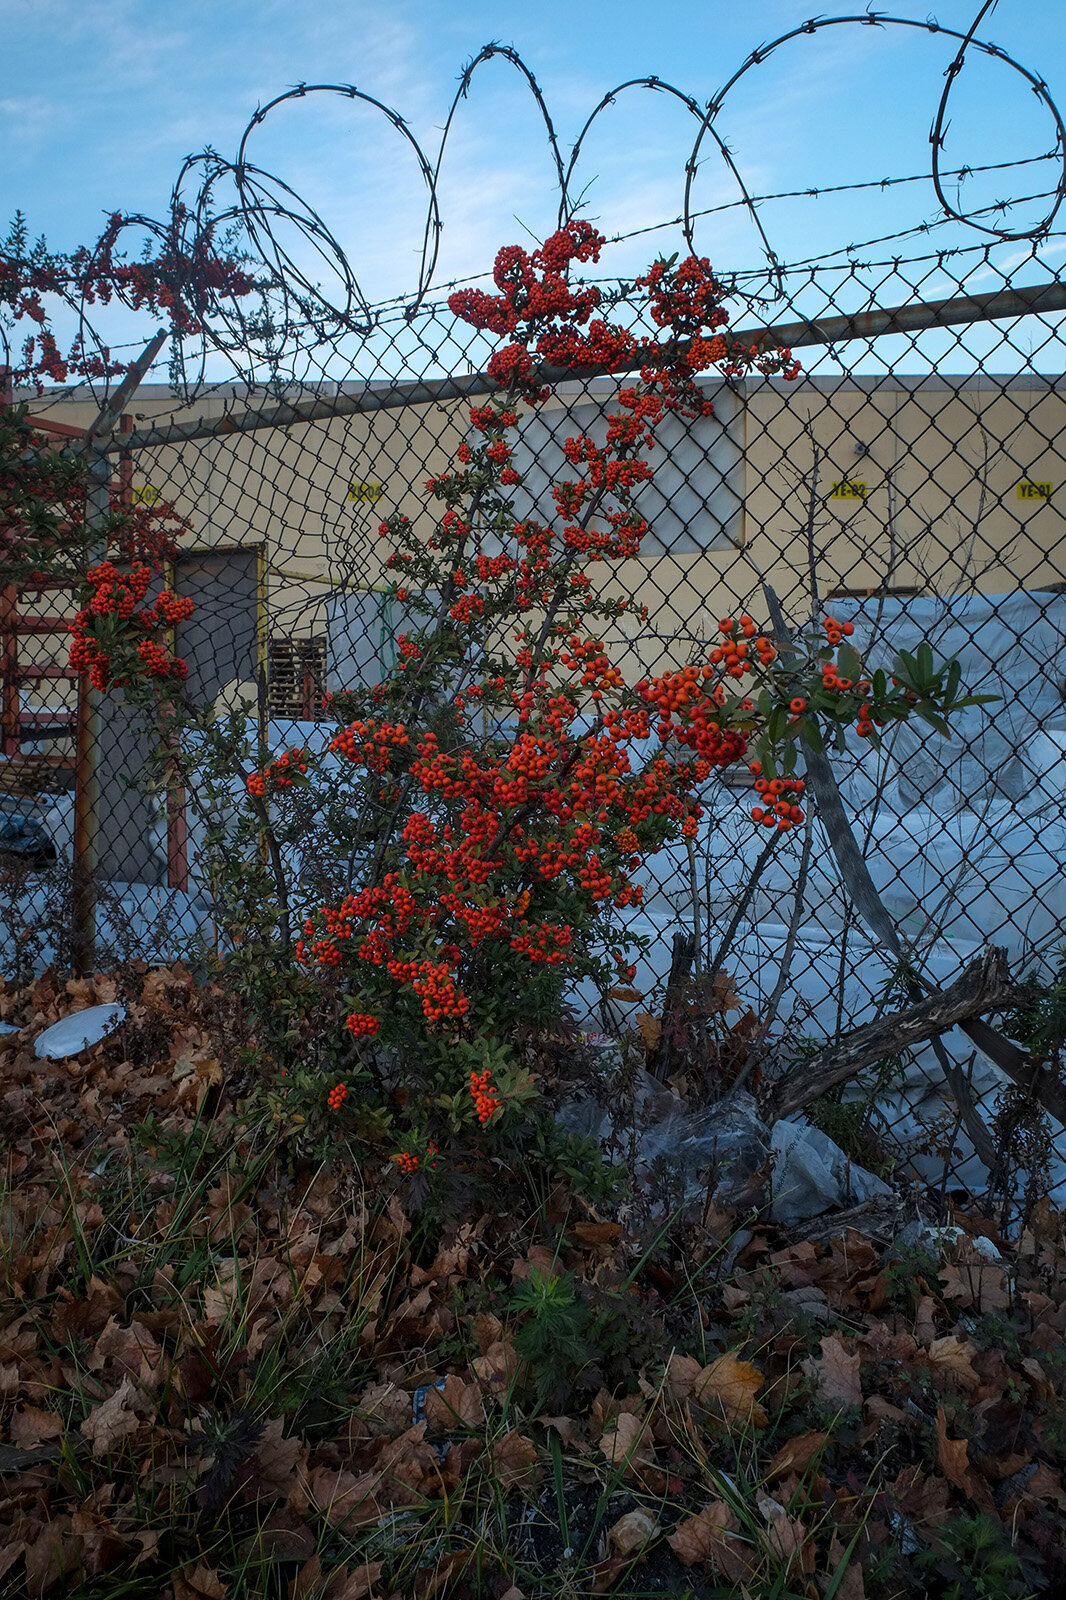 Berries and Barbed Wire